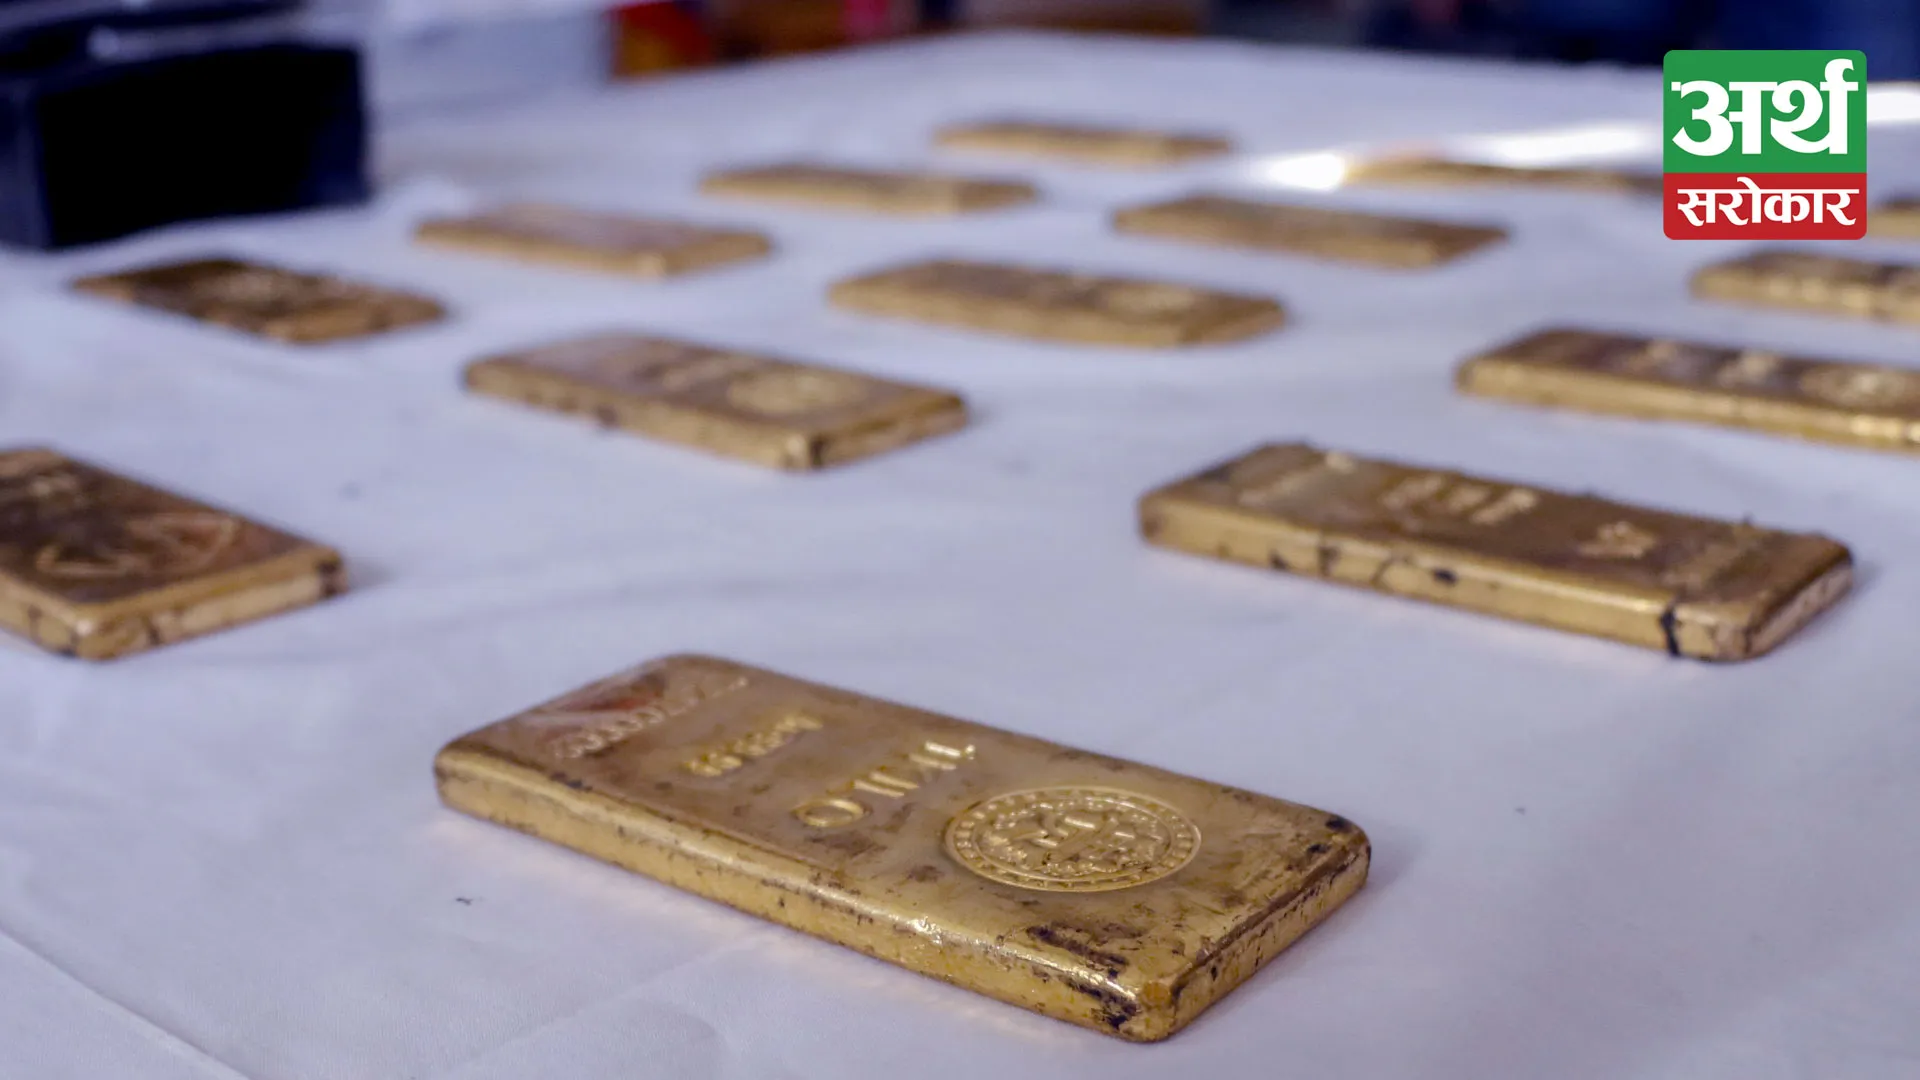 Three people arrested for smuggling 4 kilograms of gold from China.